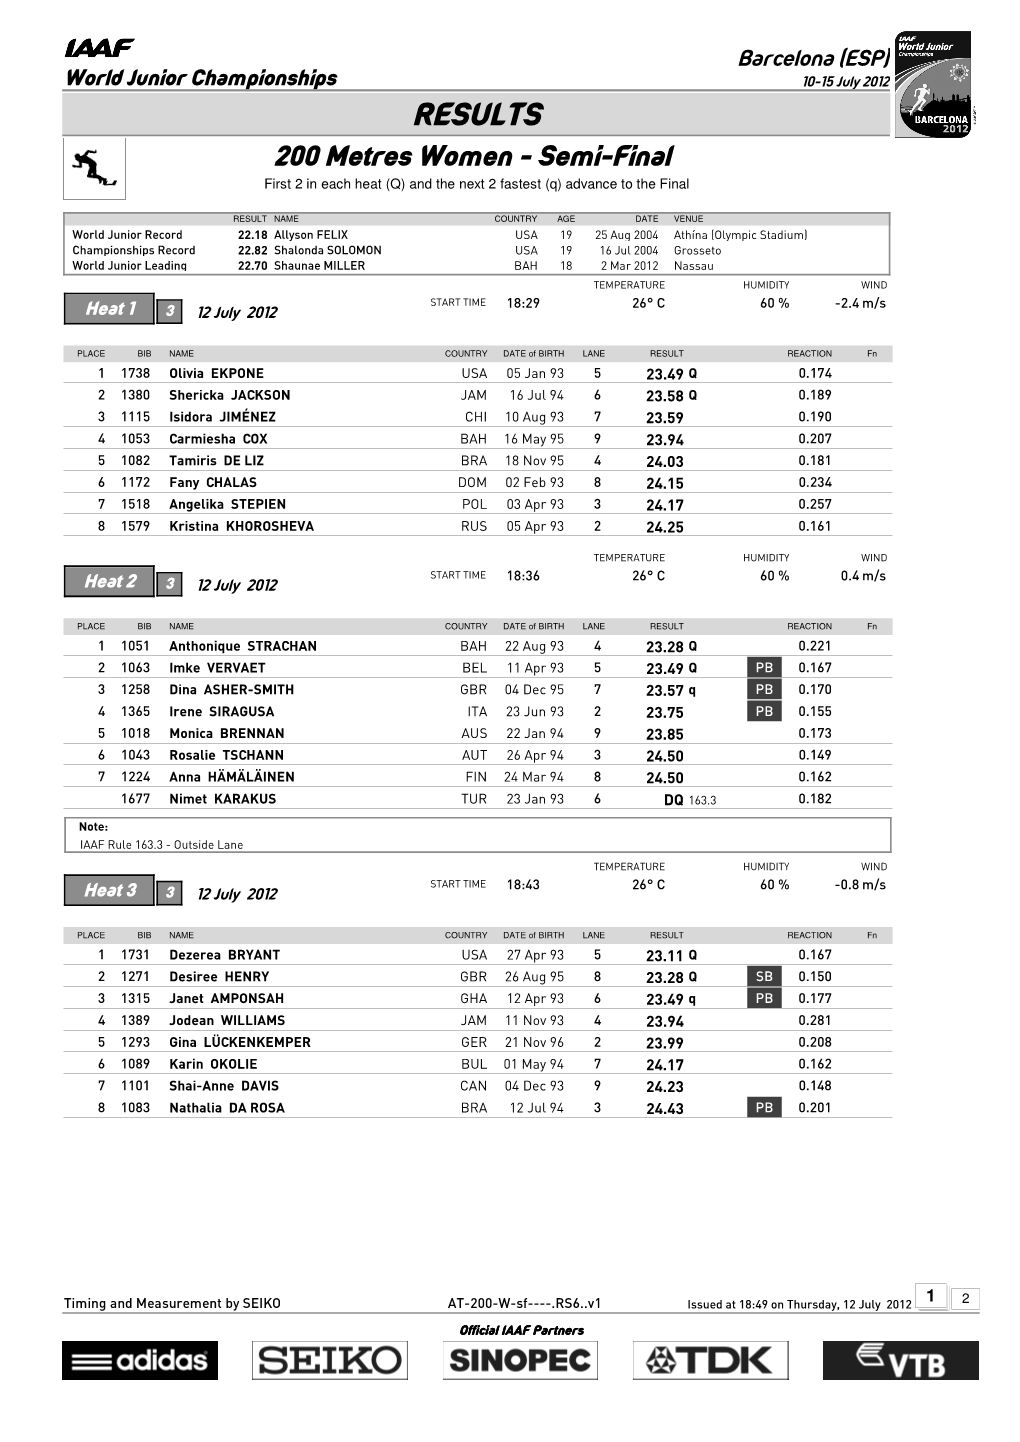 RESULTS 200 Metres Women - Semi-Final First 2 in Each Heat (Q) and the Next 2 Fastest (Q) Advance to the Final